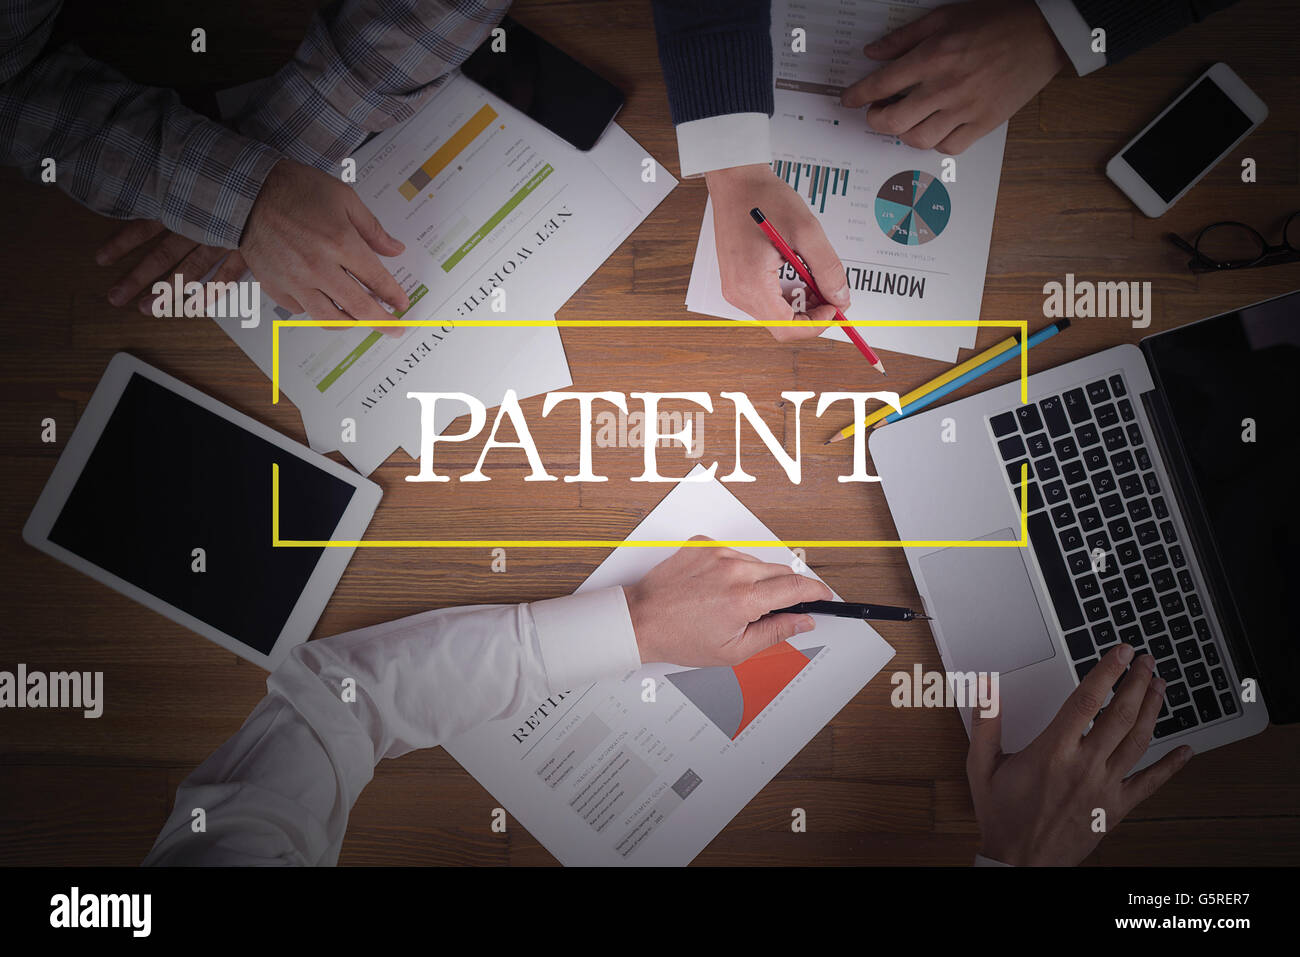 BUSINESS TEAM WORKING OFFICE  Patent TEAMWORK BRAINSTORMING CONCEPT Stock Photo